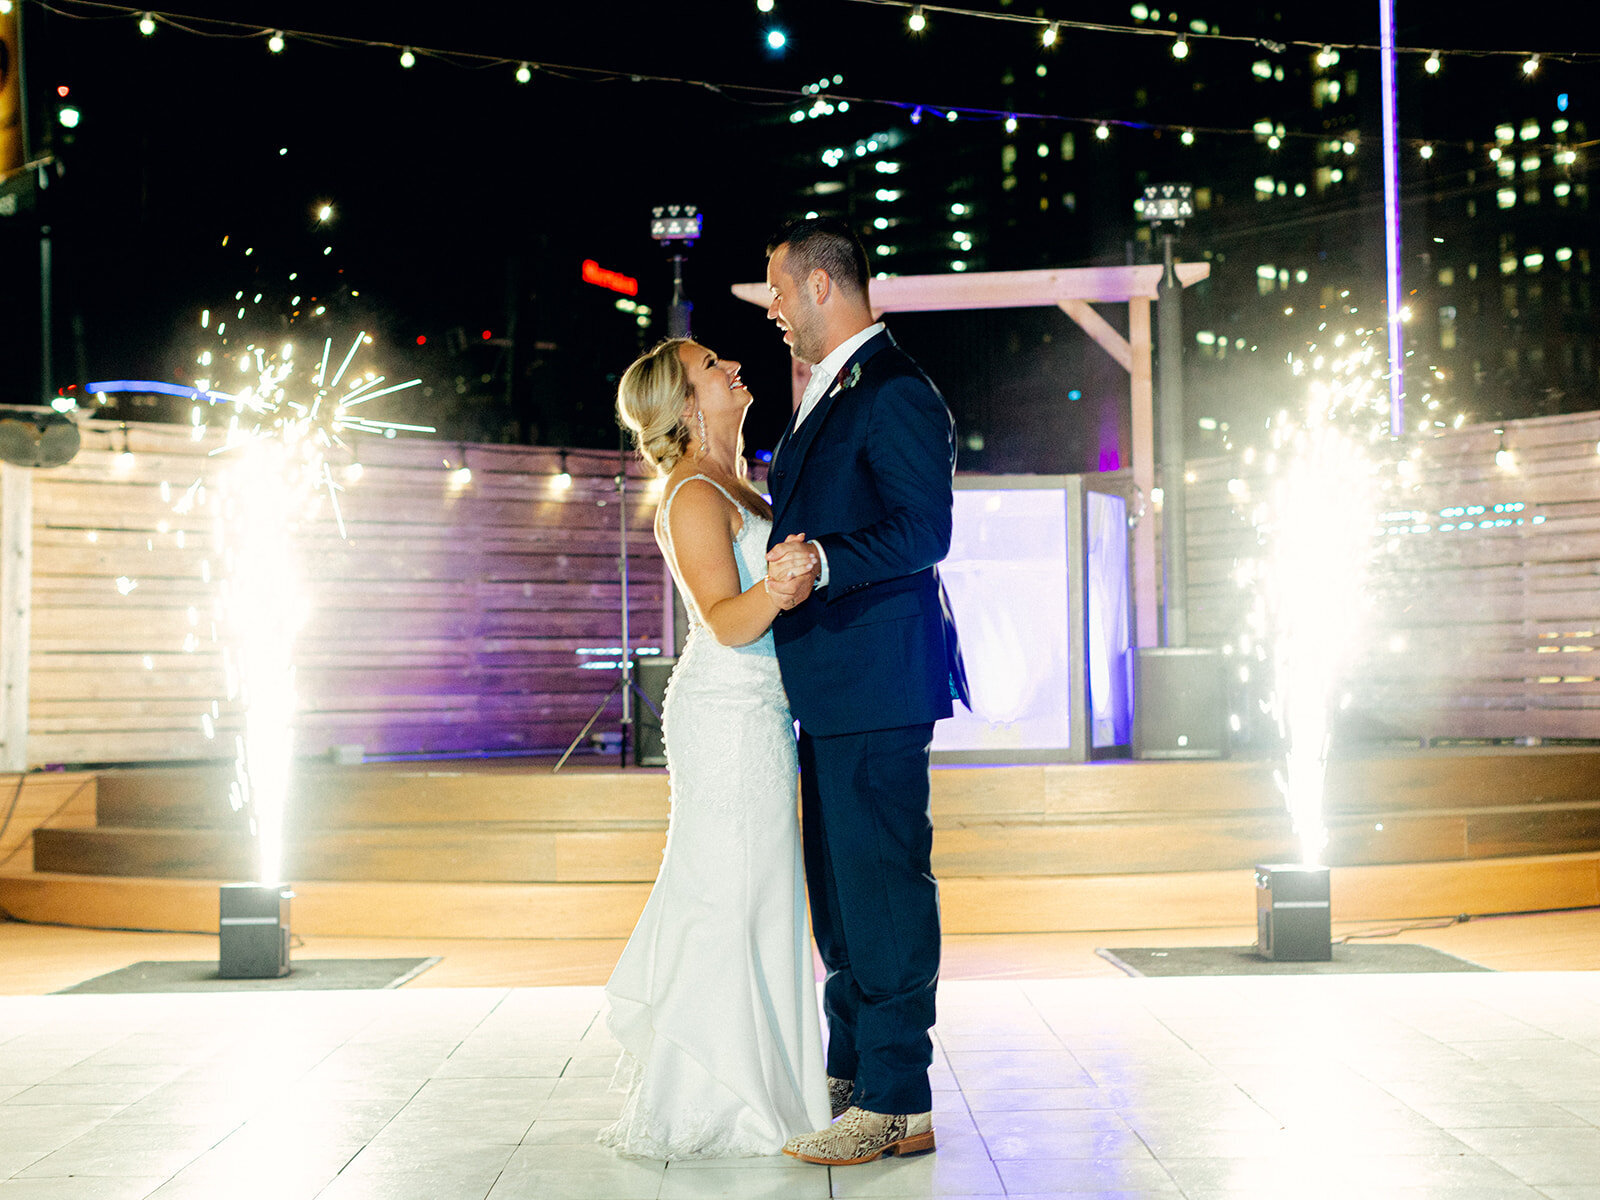 Bride and Groom dancing their first dance with sparklers